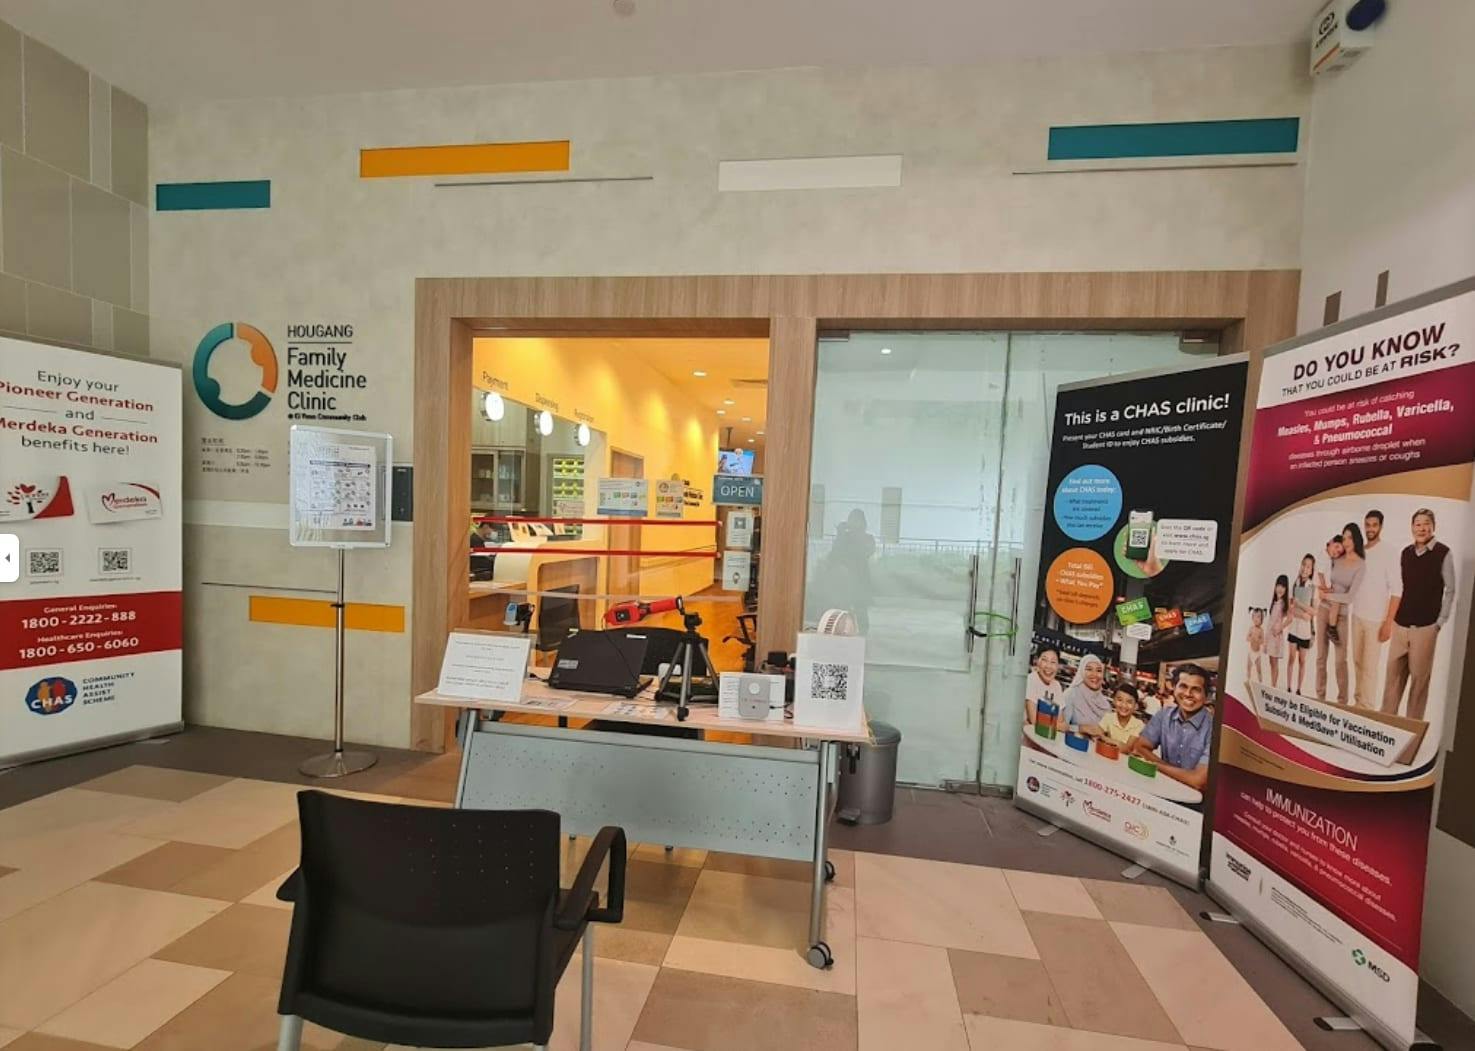 Hougang Family Medicine Clinic